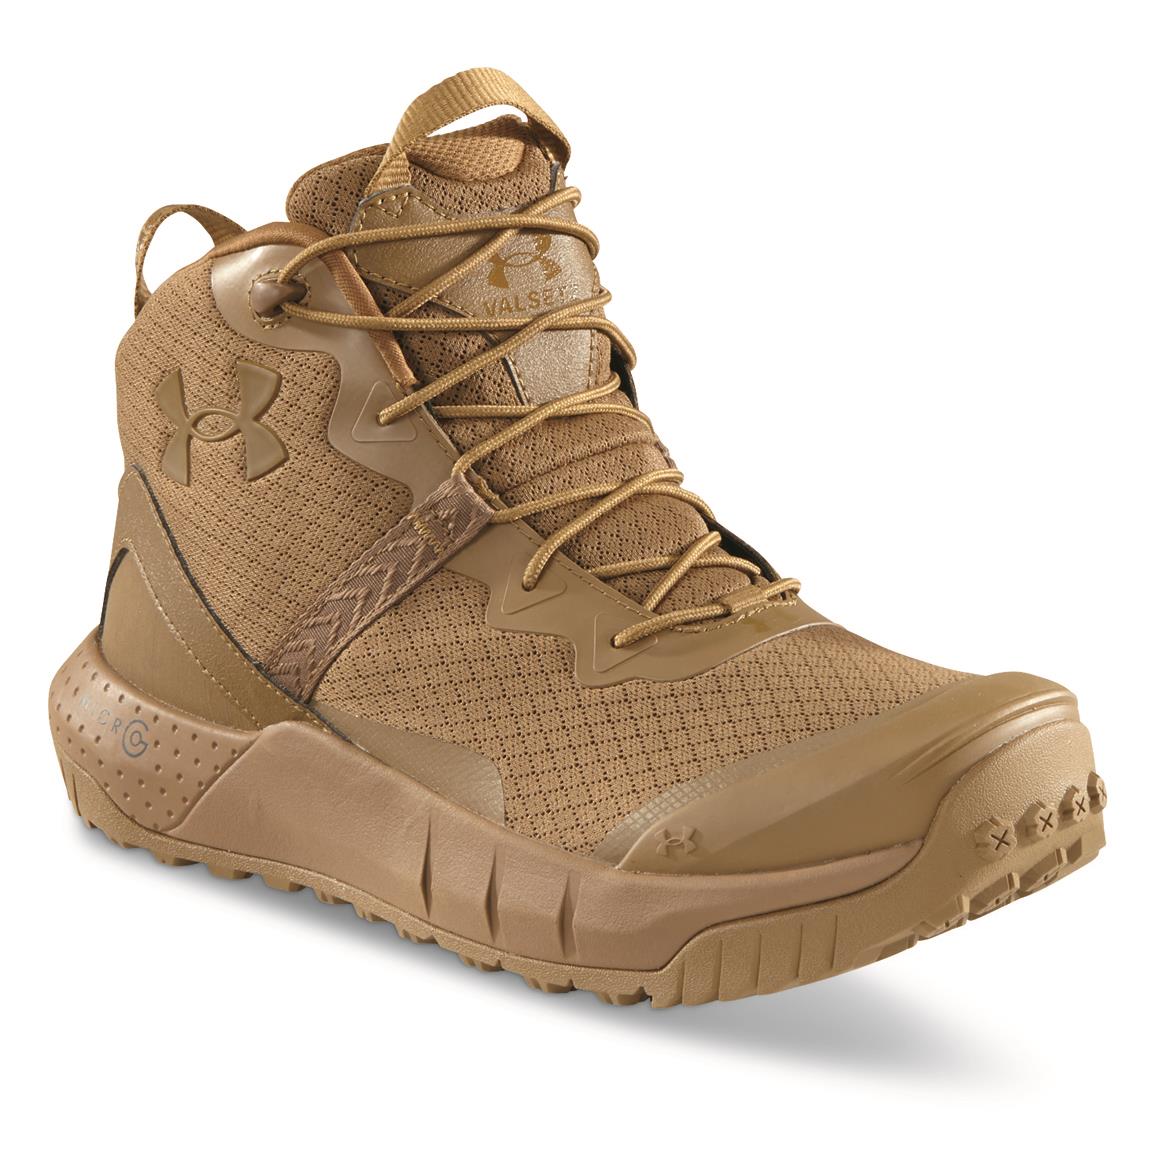 Under Armour Men's Micro G Valsetz Mid Tactical Boots, Coyote/coyote/coyote